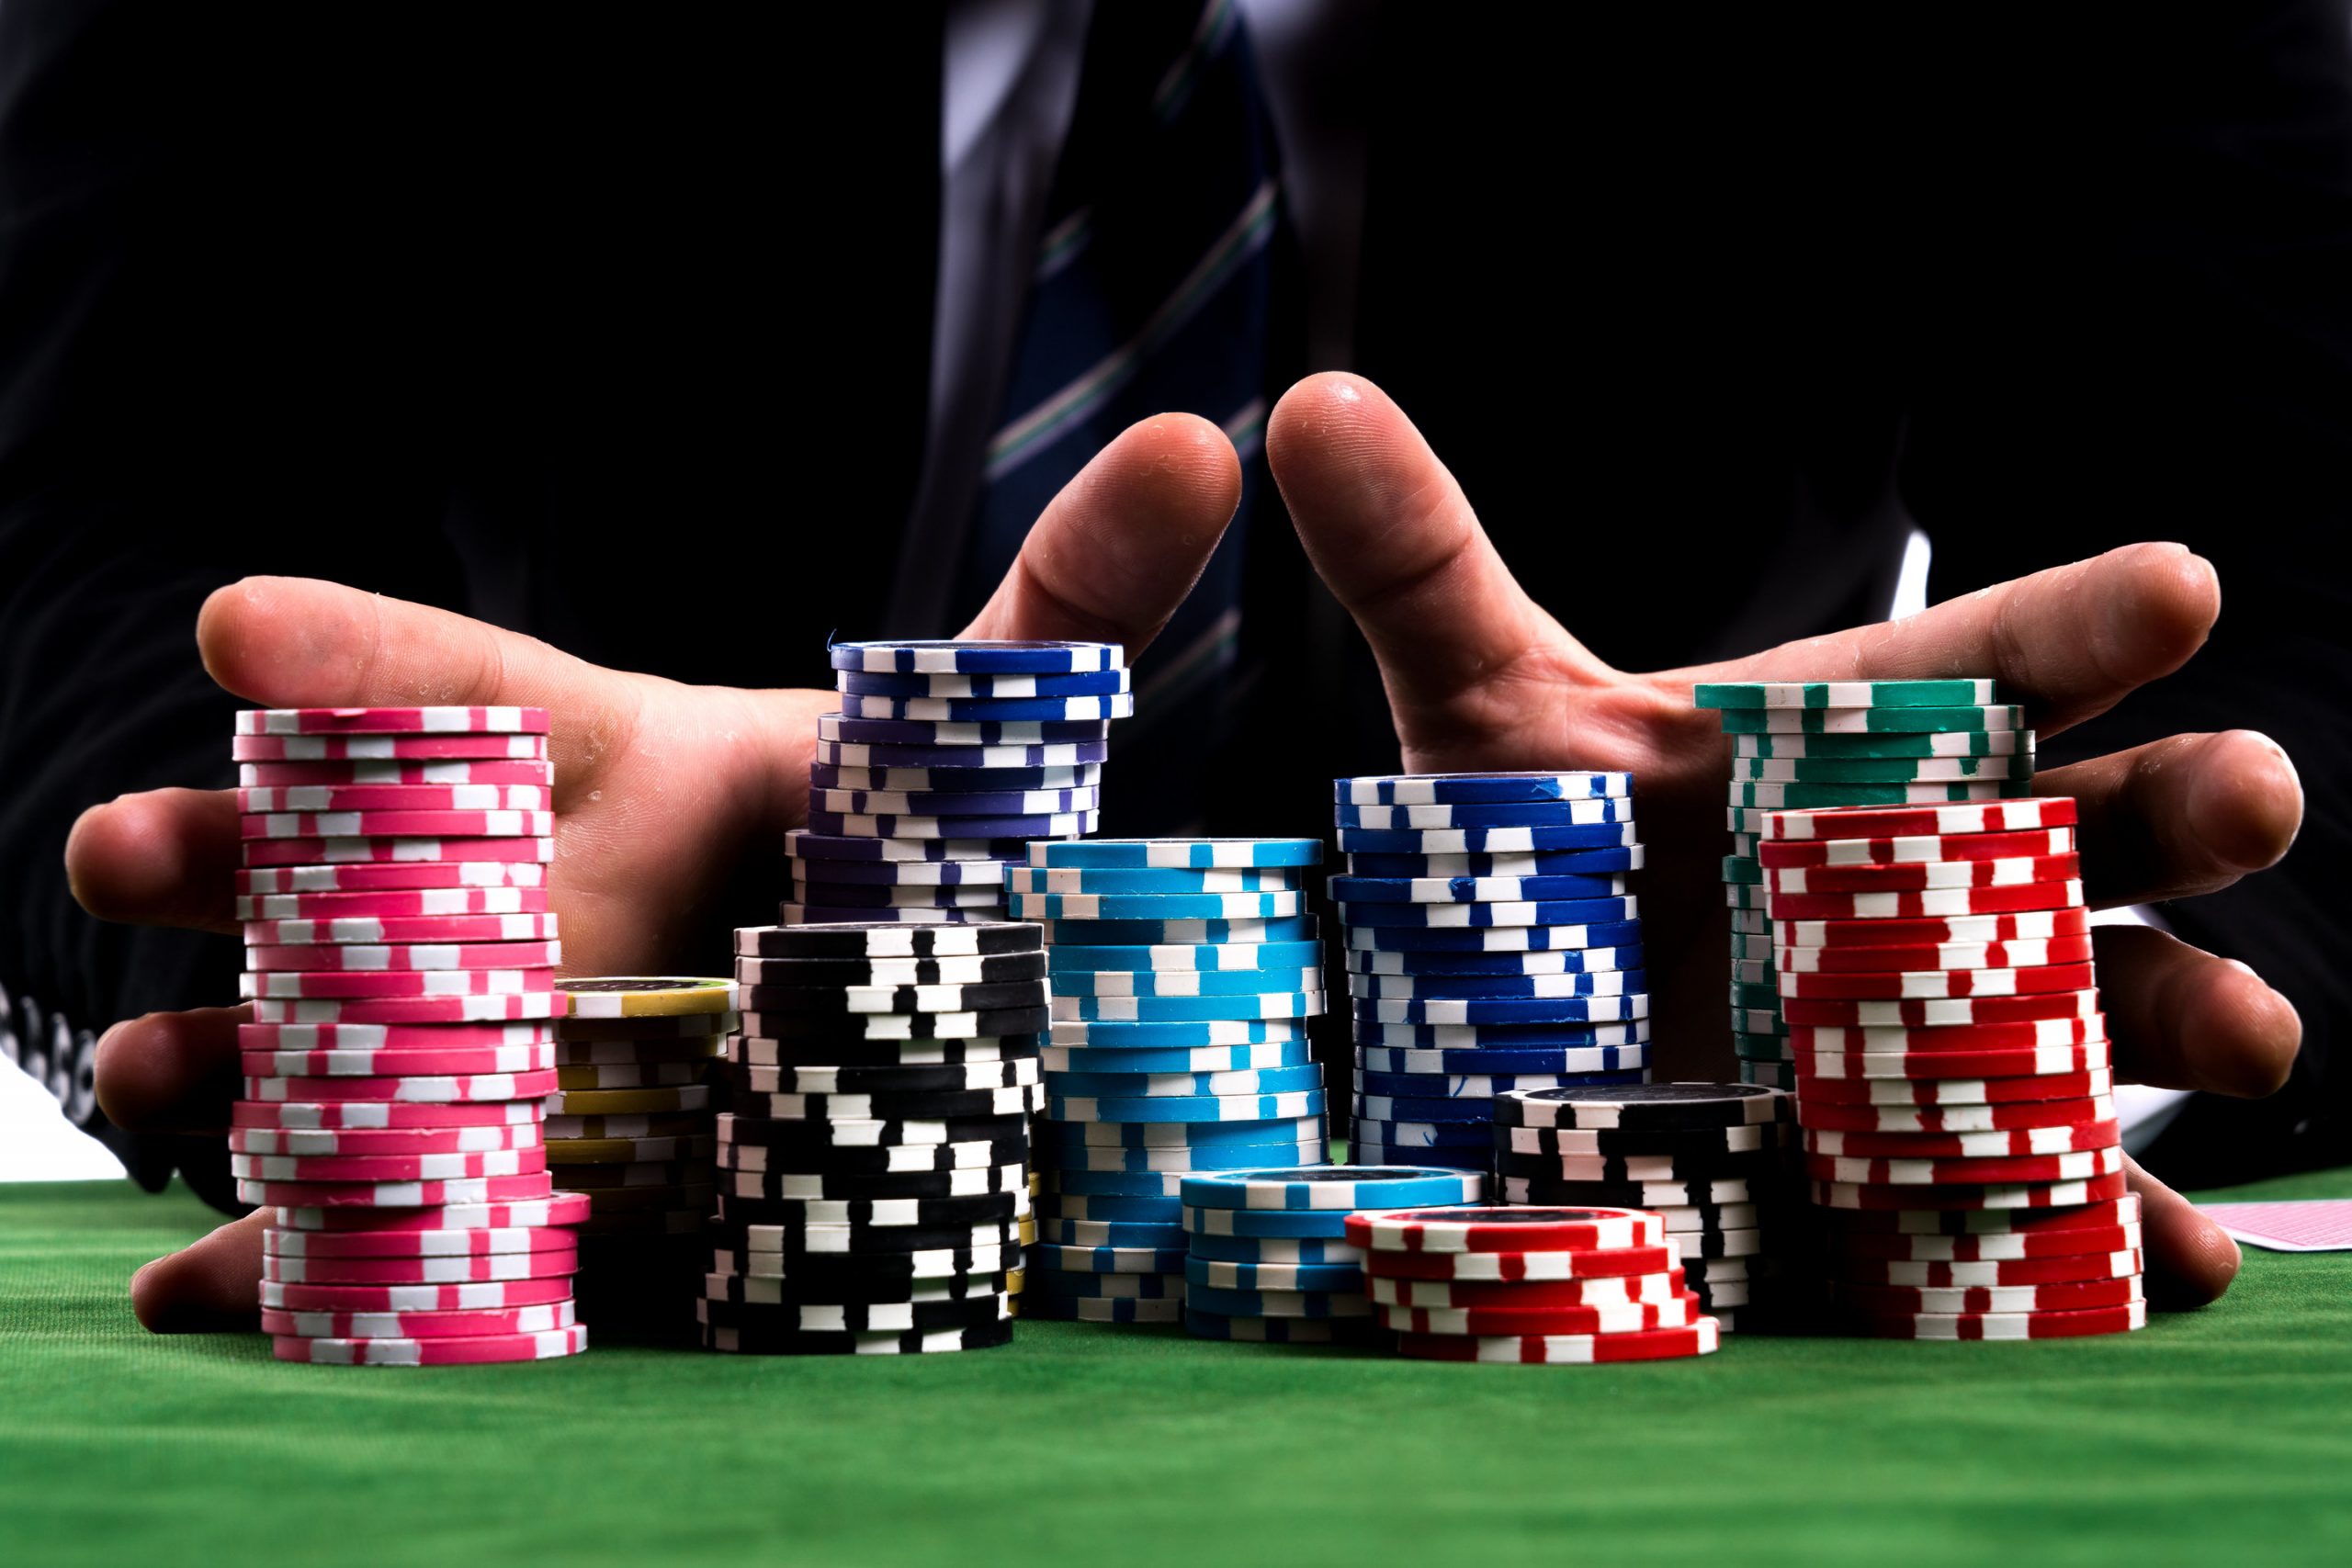 How to become rich by playing poker